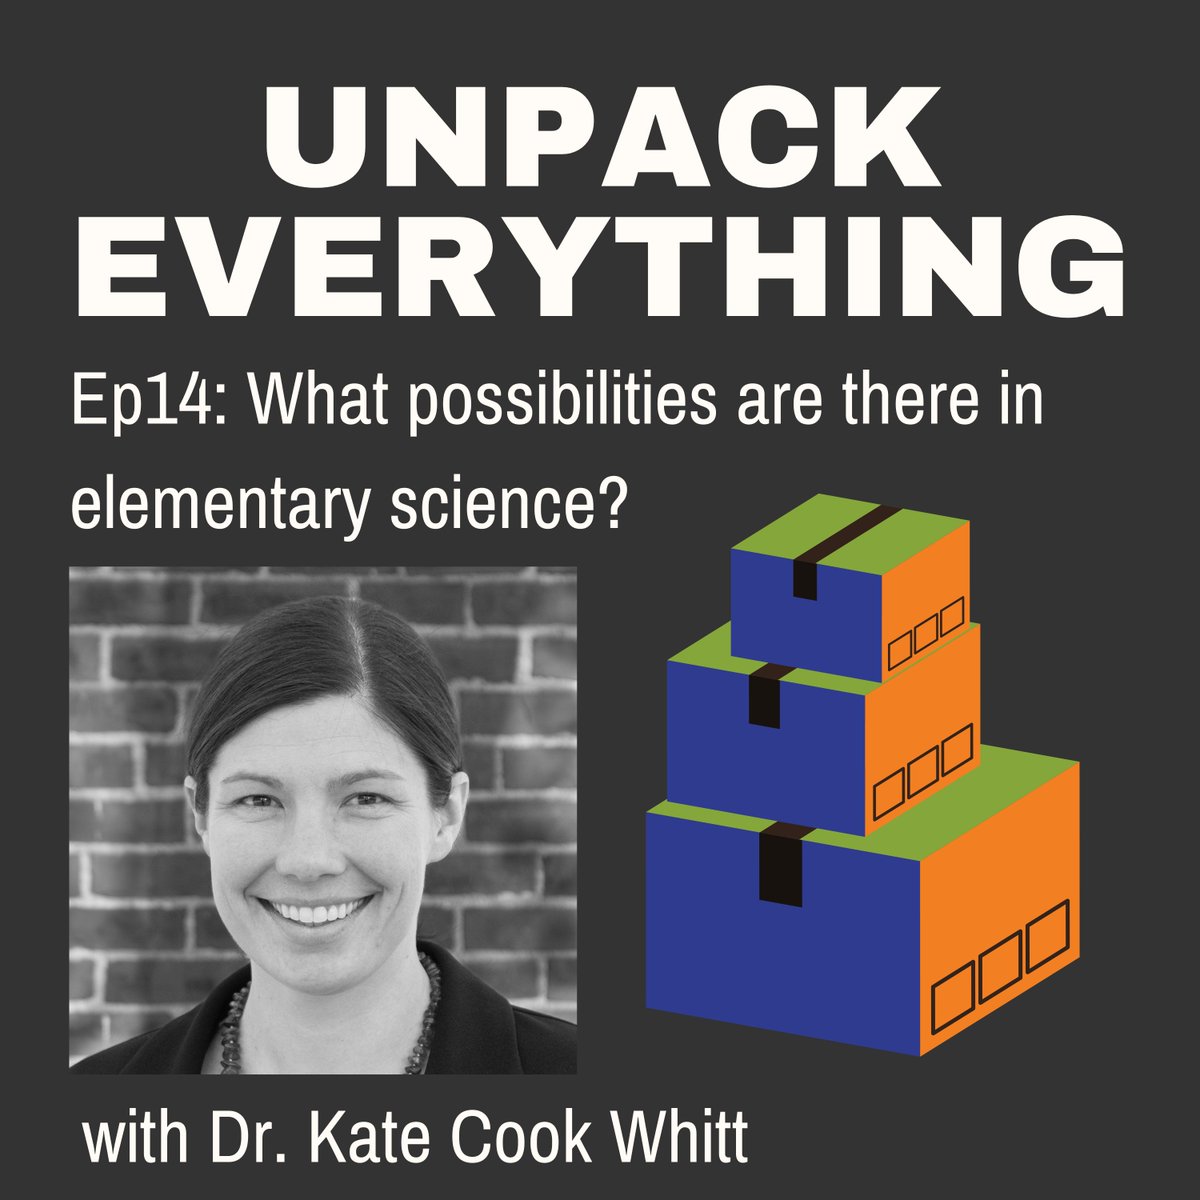 MMSA's Dr. @KateCookWhitt was featured on Unpack Everything's latest podcast episode! Hear her insights on elementary science now: open.spotify.com/show/6kvTTZDJI… #NSFfunded #BSCS